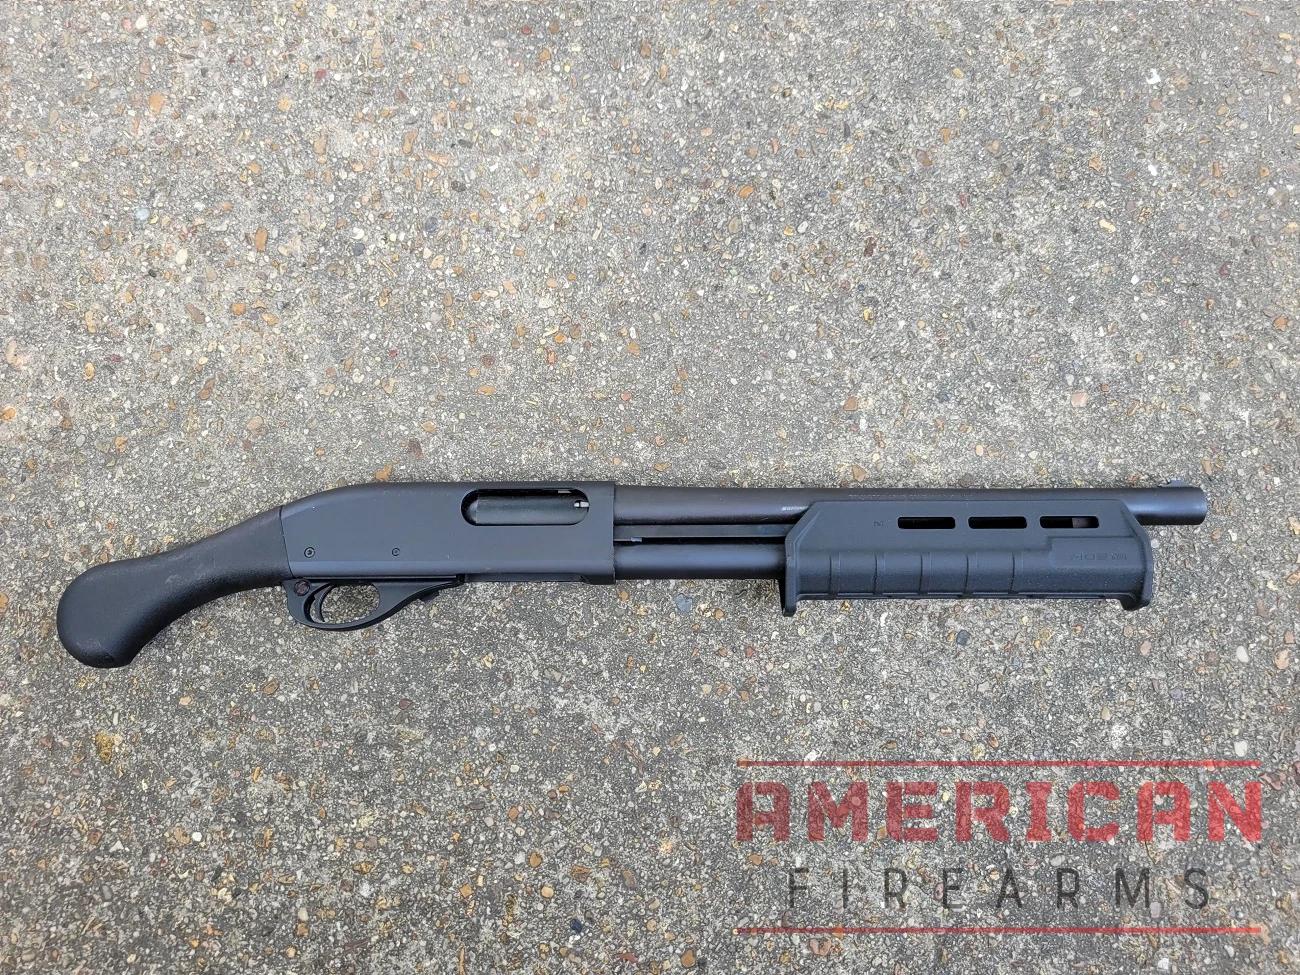 Big Green introduced the Tac-14 in 2017 as a response to the Mossberg Shockwave series firearms, and is available in this Magpul fore-end/Raptor grip configuration and a hardwood version. Sadly there's no all-stainless Marine model (yet.)